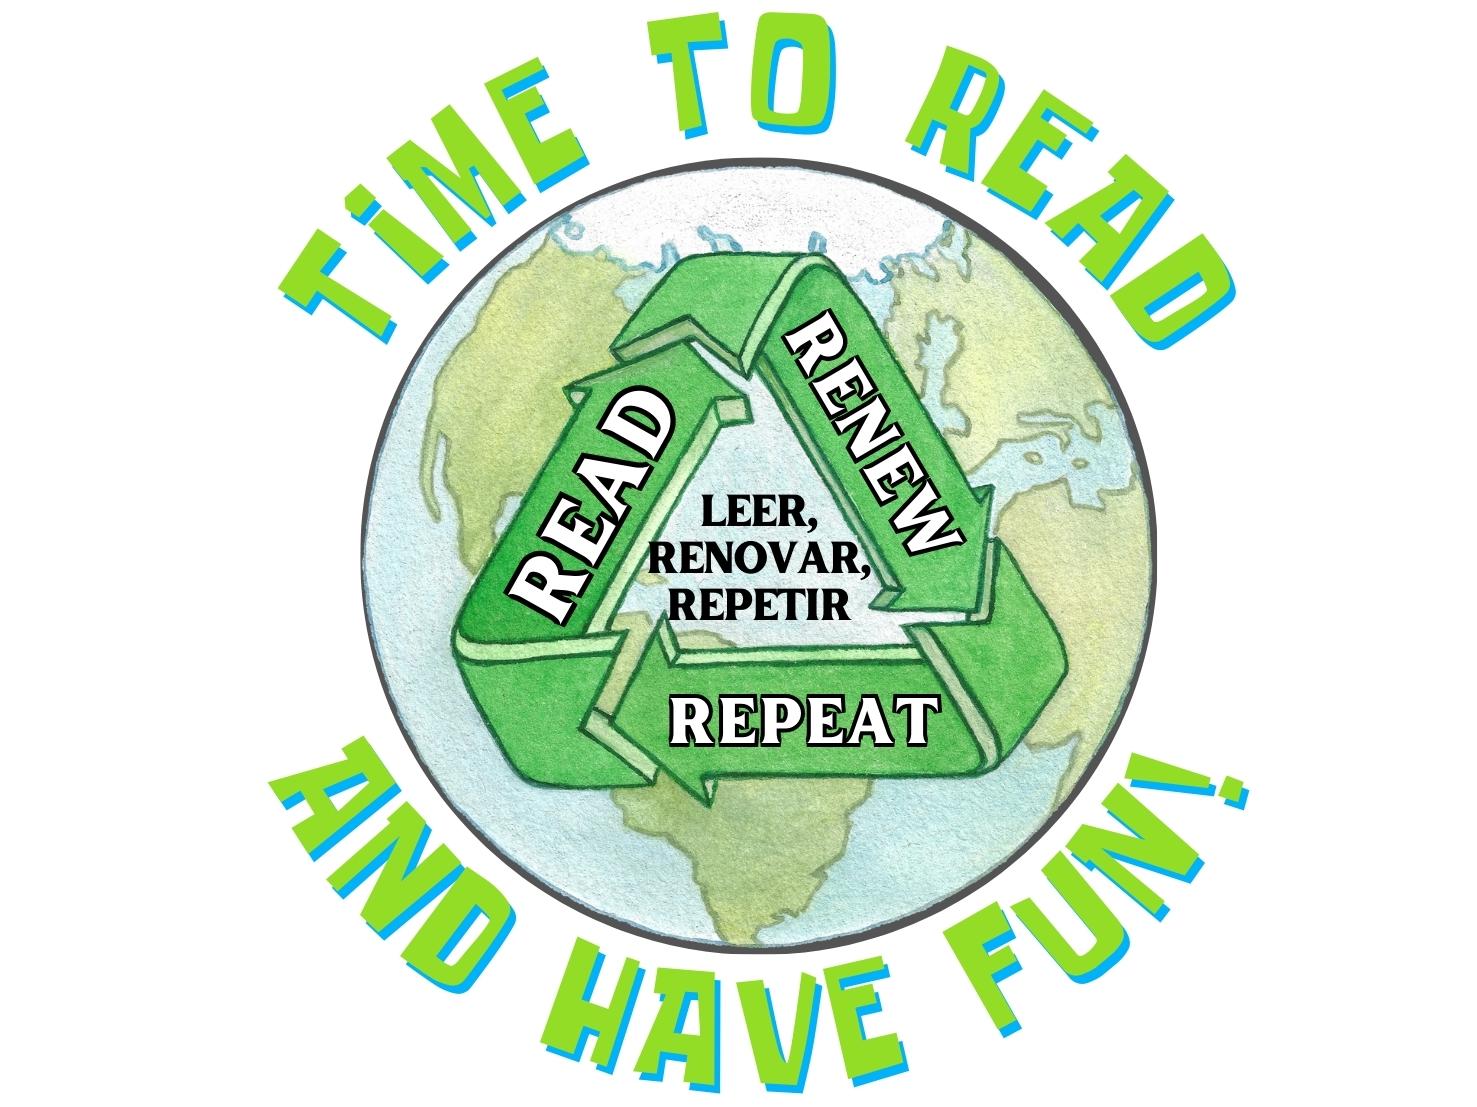 Picture of earth with a recycling symbol, saying "Read, Renew, Repeat" with a caption saying "Time to Read and Have Fun!"